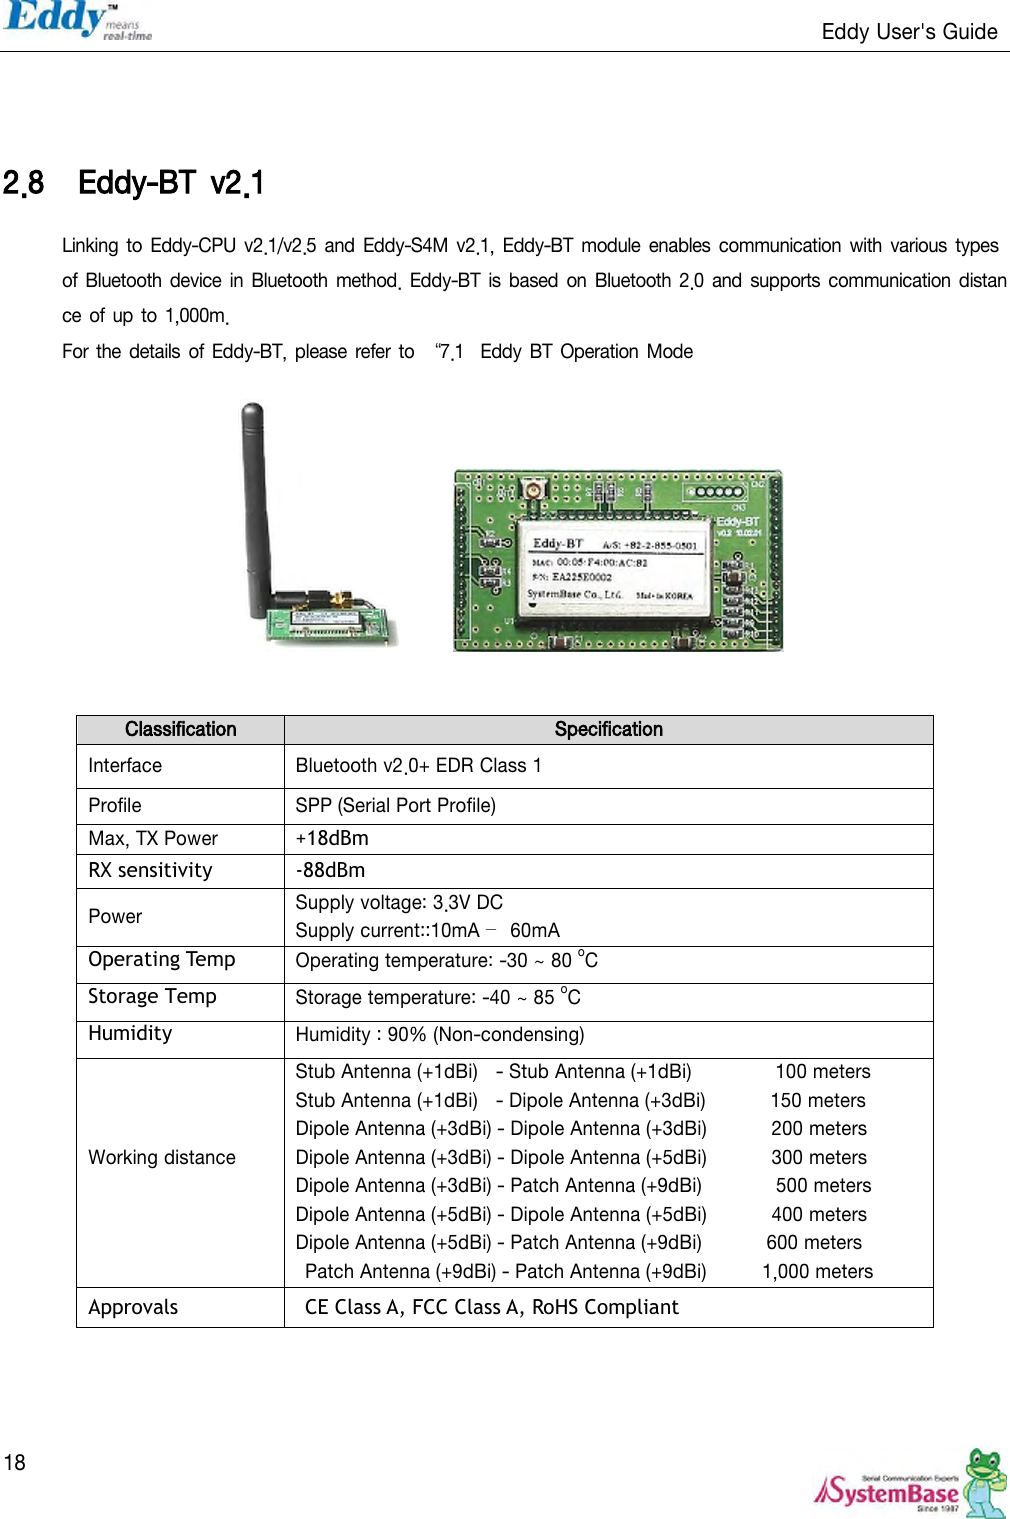                                                                   Eddy User&apos;s Guide   18    2.8 Eddy-BT  v2.1 Linking to  Eddy-CPU v2.1/v2.5 and Eddy-S4M v2.1, Eddy-BT module enables communication with various types of Bluetooth device  in Bluetooth method.  Eddy-BT is based on  Bluetooth 2.0 and supports communication  distance  of  up  to 1,000m.    For the details of Eddy-BT, please  refer to ‚7.1   Eddy BT Operation Mode             Classification Specification Interface Bluetooth v2.0+ EDR Class 1 Profile SPP (Serial Port Profile) Max, TX Power +18dBm RX sensitivity -88dBm Power Supply voltage: 3.3V DC Supply current::10mA – 60mA Operating Temp Operating temperature: -30 ~ 80 oC Storage Temp Storage temperature: -40 ~ 85 oC Humidity Humidity : 90% (Non-condensing) Working distance  Stub Antenna (+1dBi)  - Stub Antenna (+1dBi)                  100 meters Stub Antenna (+1dBi)  - Dipole Antenna (+3dBi)              150 meters Dipole Antenna (+3dBi) - Dipole Antenna (+3dBi)              200 meters Dipole Antenna (+3dBi) - Dipole Antenna (+5dBi)              300 meters Dipole Antenna (+3dBi) - Patch Antenna (+9dBi)                500 meters Dipole Antenna (+5dBi) - Dipole Antenna (+5dBi)              400 meters Dipole Antenna (+5dBi) - Patch Antenna (+9dBi)              600 meters Patch Antenna (+9dBi) - Patch Antenna (+9dBi)            1,000 meters Approvals CE Class A, FCC Class A, RoHS Compliant  